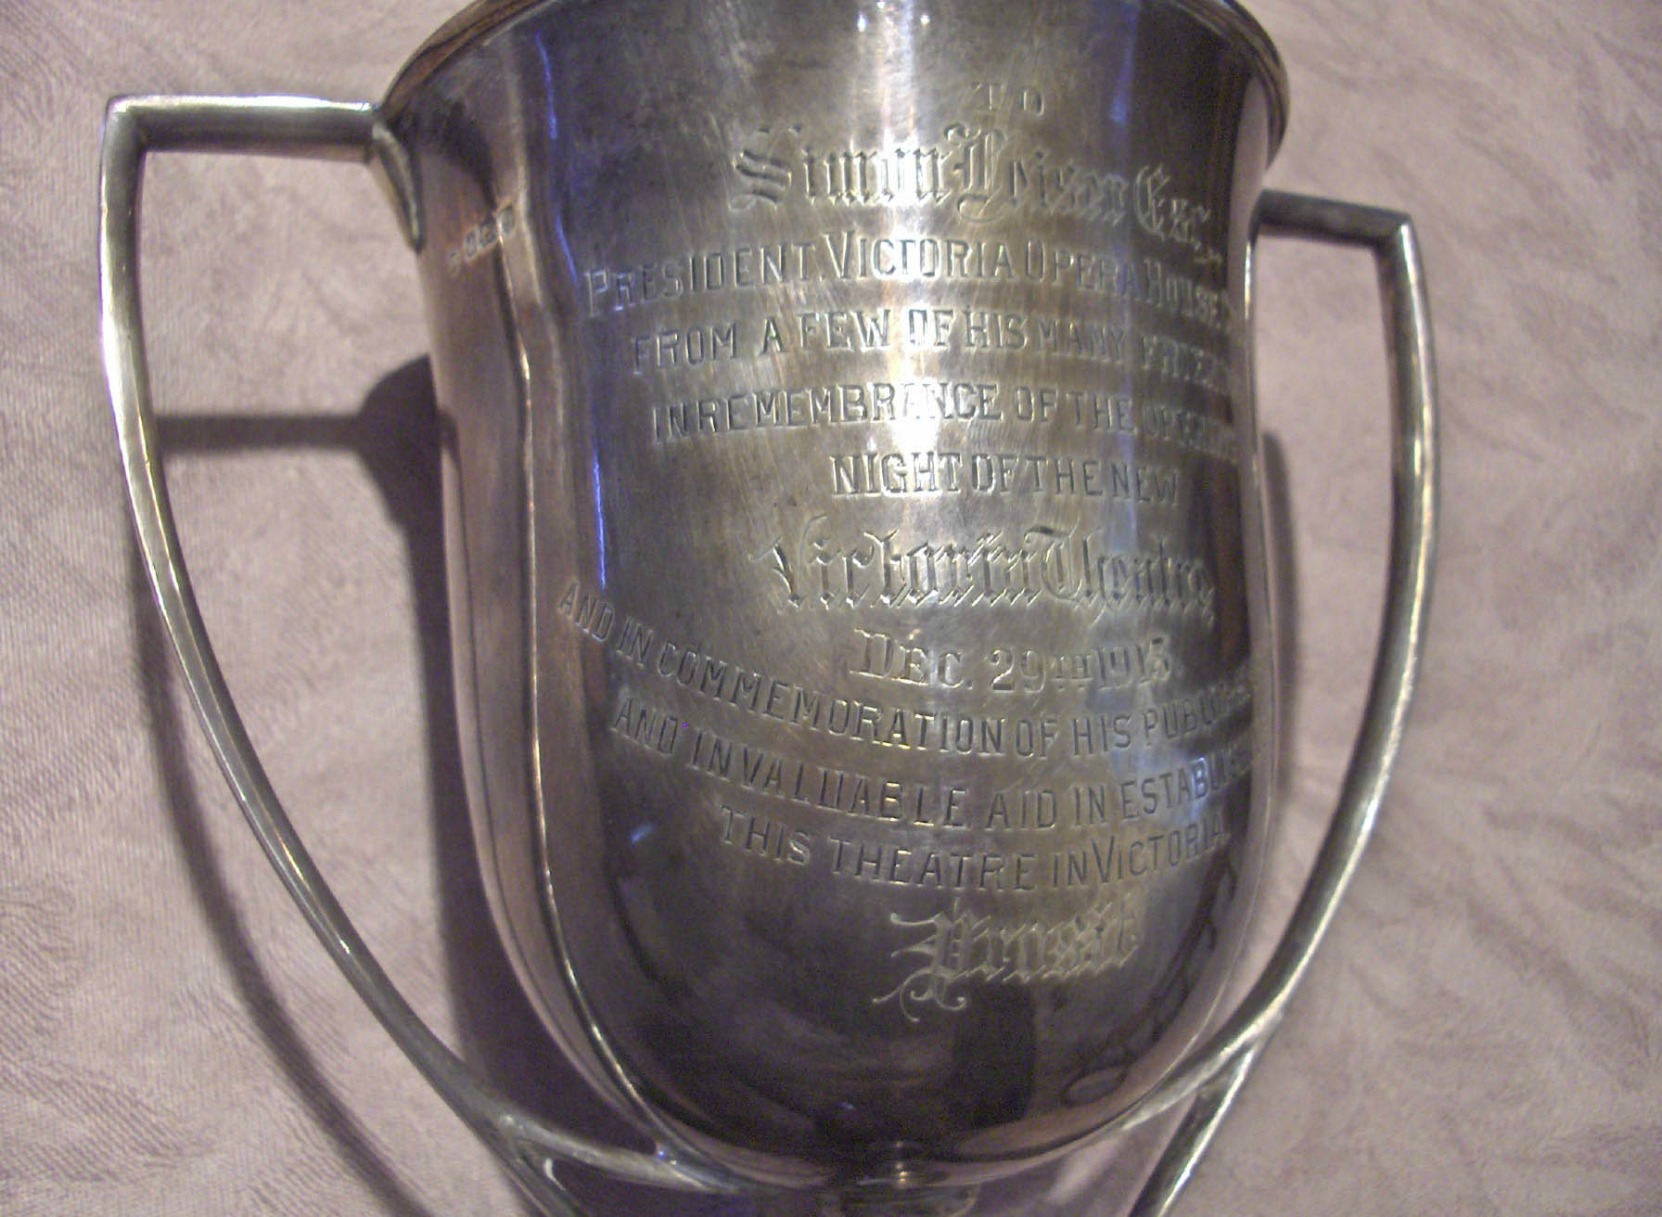 The Loving Cup presented to Simon Leiser in 1913 to commemorate his role in building what is now the Royal Theater in Victoria (photo courtesy of Ben Heilbronn, a Leiser descendant. Used with permission)